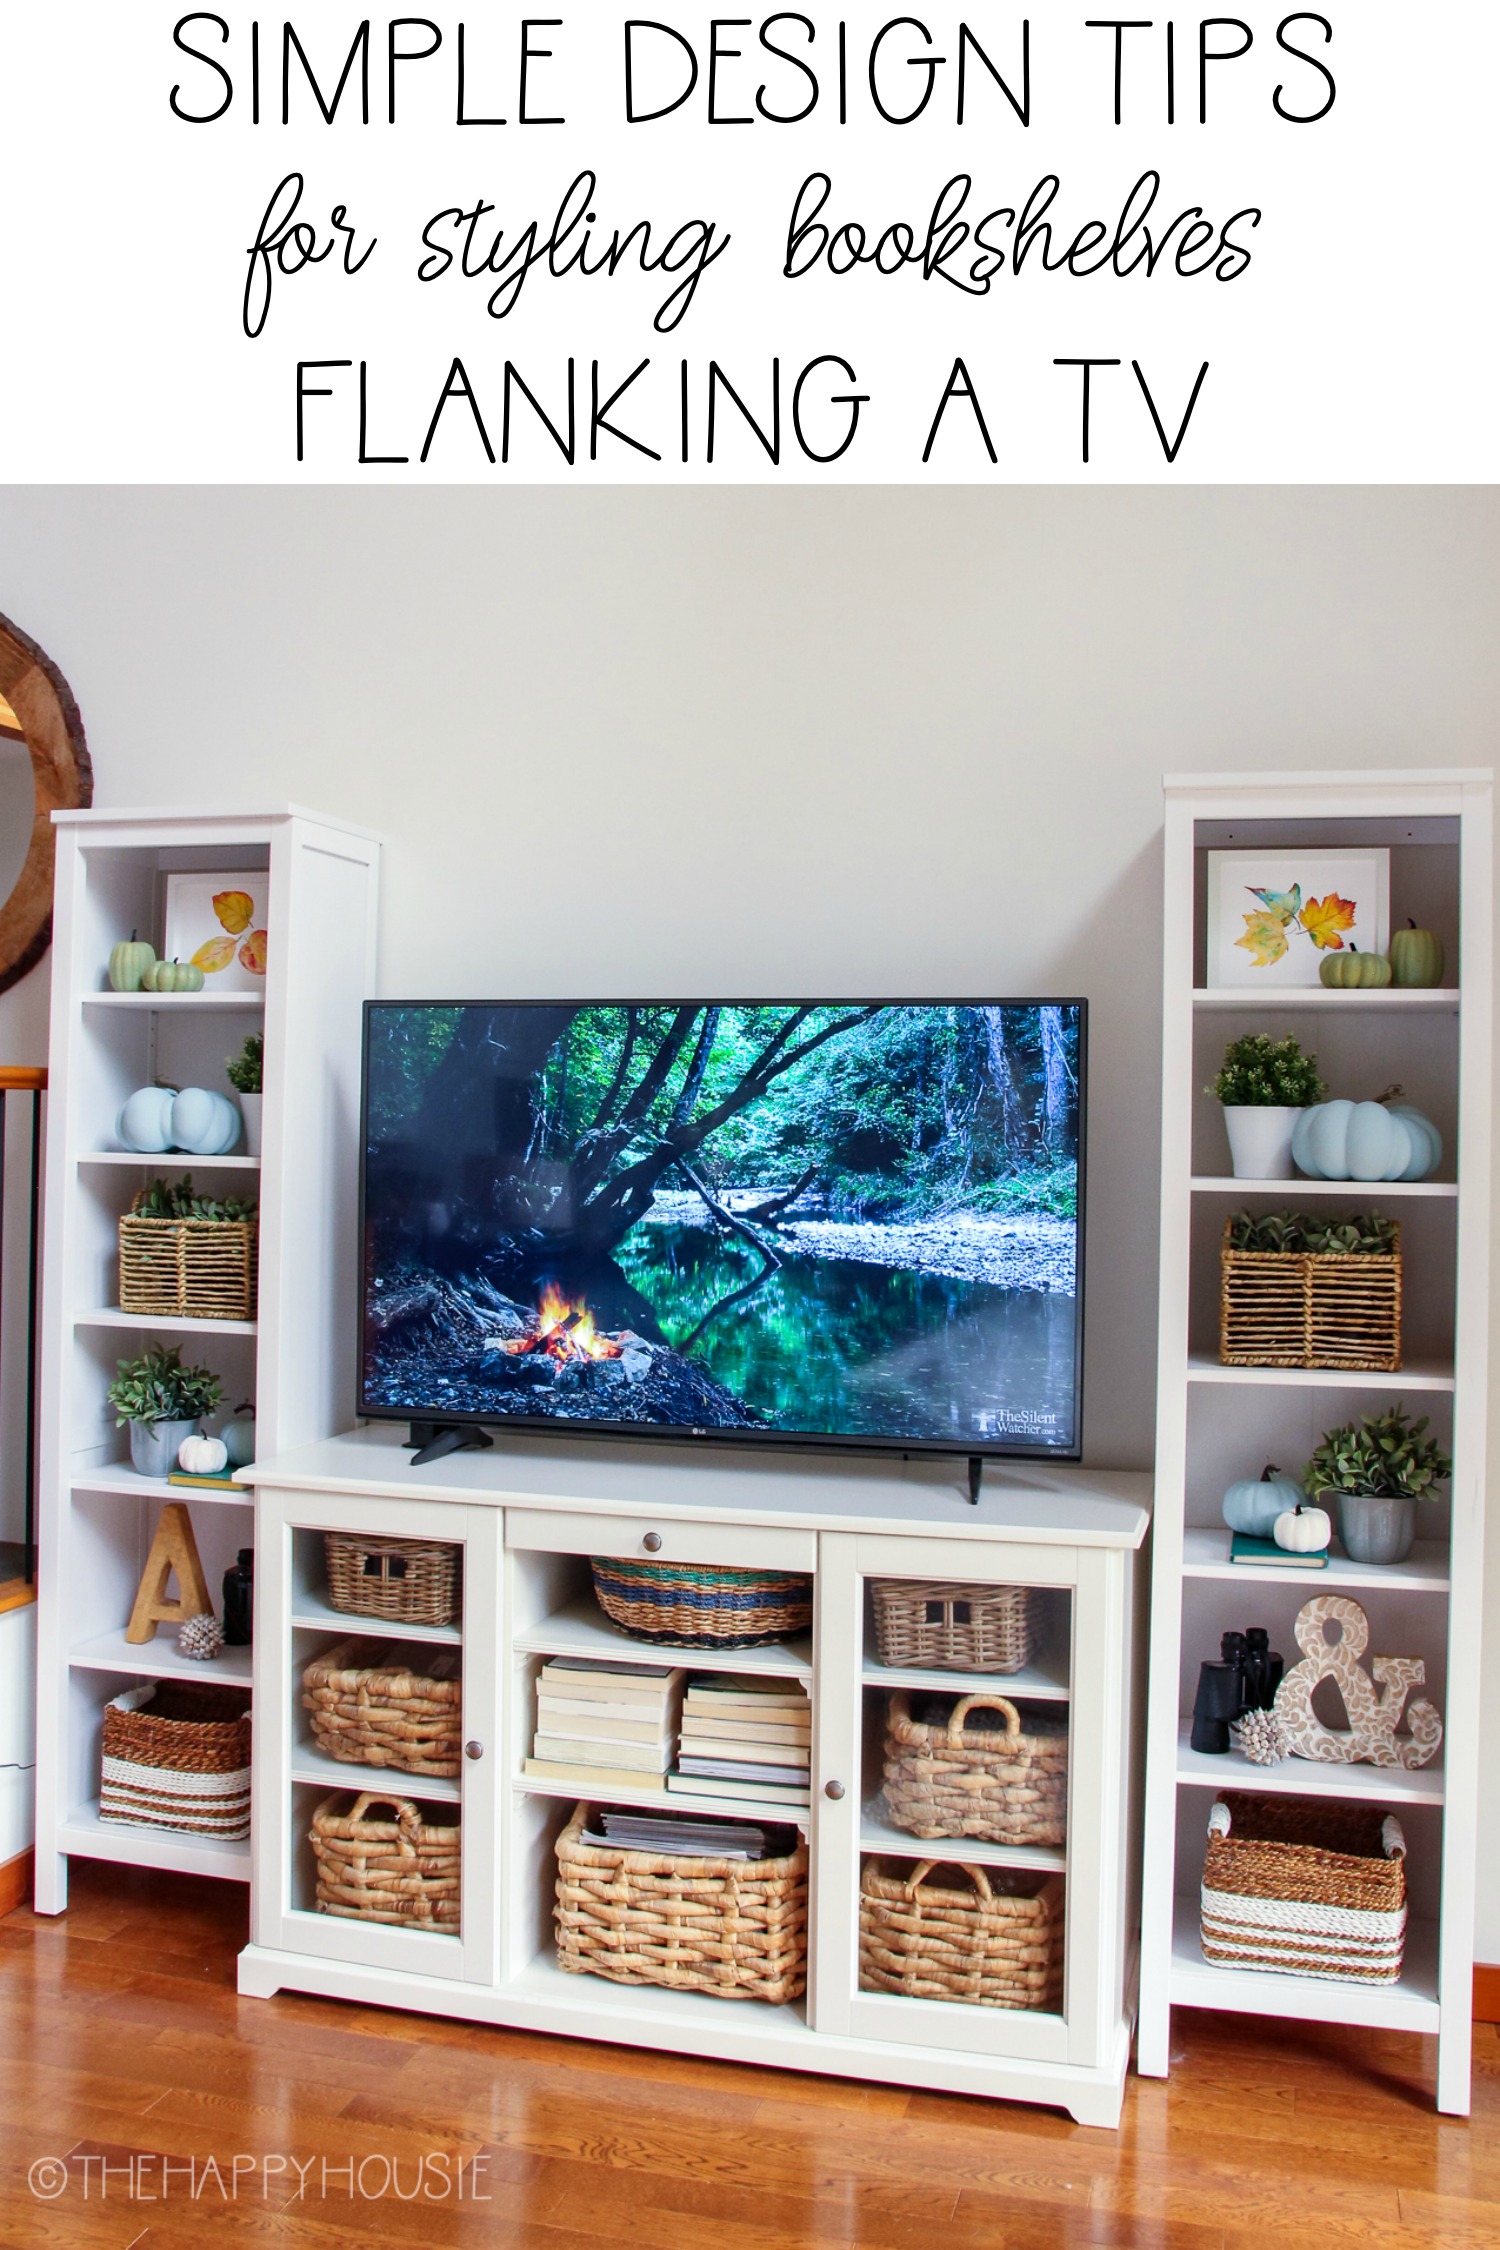 Simple Design Tips For Styling Bookshelves Flanking A TV graphic.